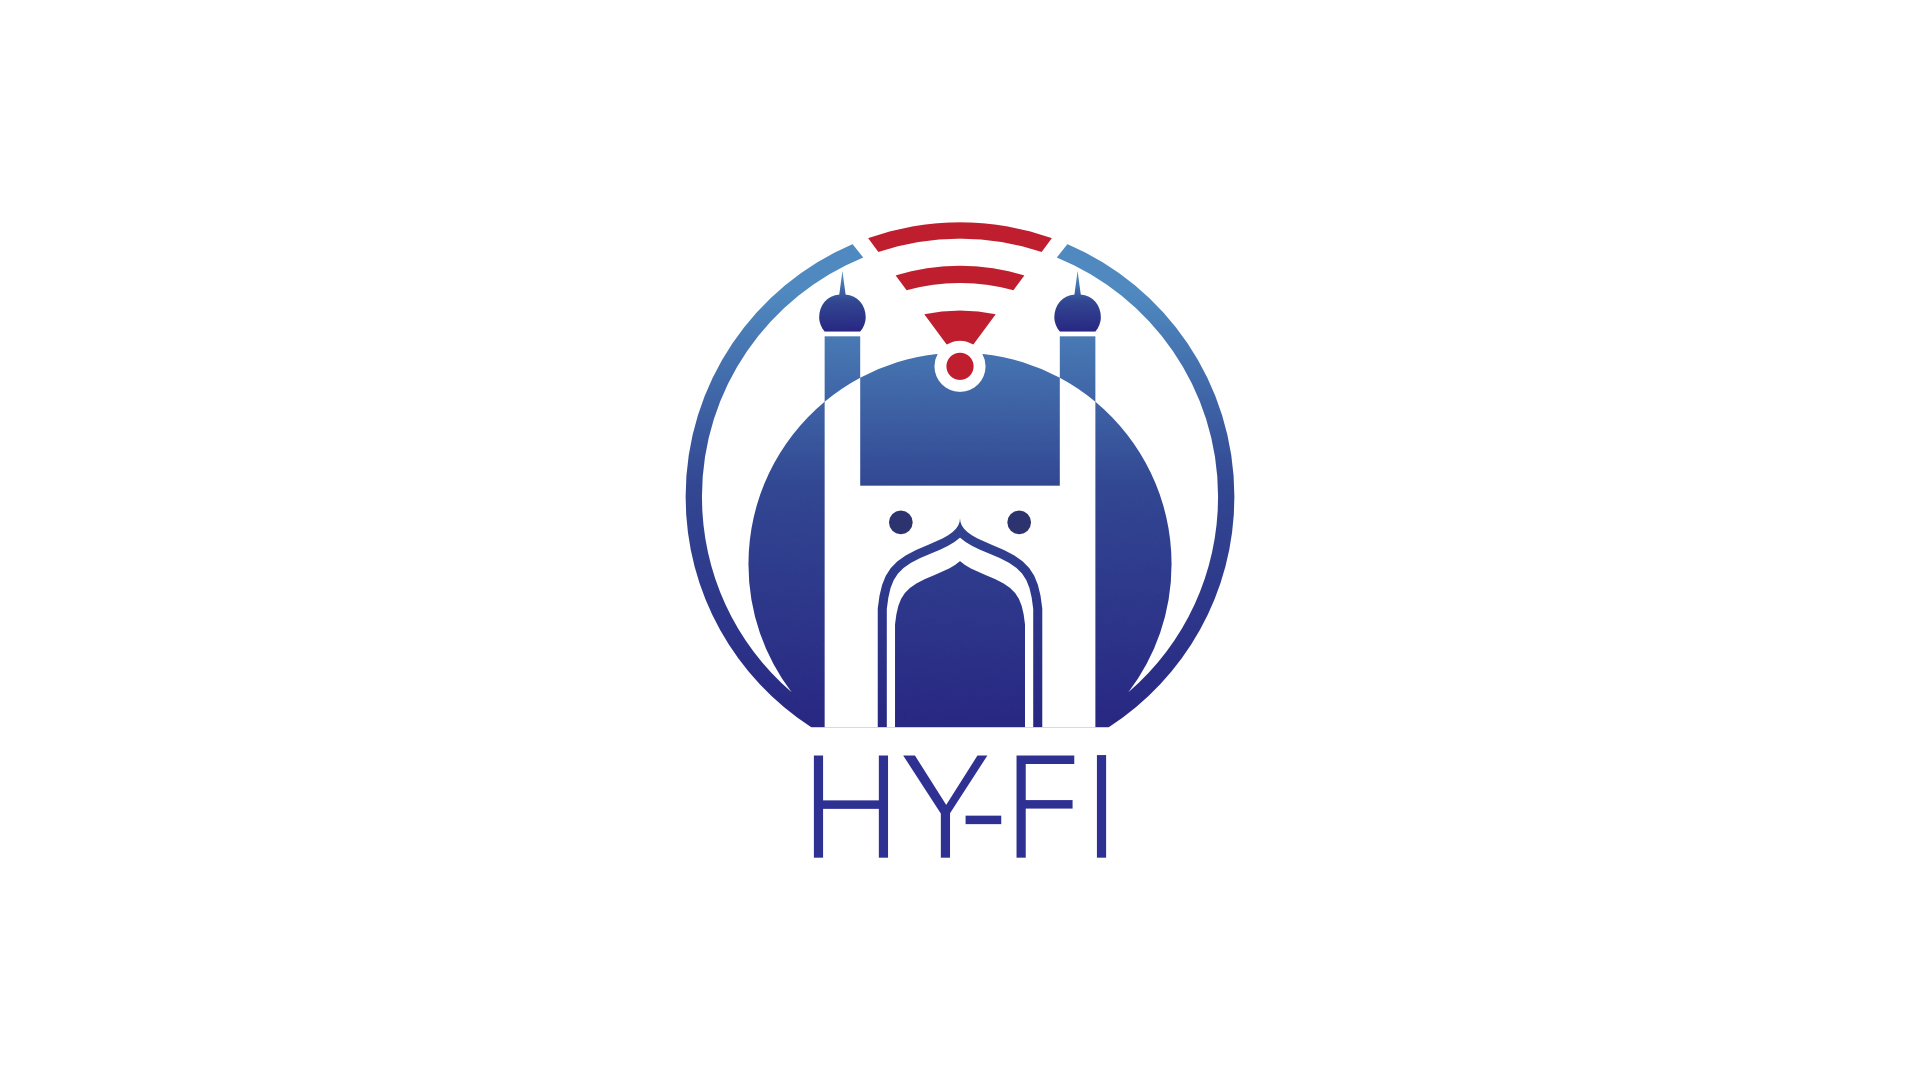 The identity is a combination of uppercase â€˜Hâ€™ with â€˜WIFIâ€™ symbol. Uppercase â€˜Hâ€™ has been effectively used to metaphorically represent Charminar, noted monument of Hyderabad. The cropped outer circle balances the overall form and illustrates the public places at which these services are available. To attract attention â€˜redâ€™ colour was used for â€˜WIFIâ€™ symbol and blue for uppercase â€˜Hâ€™ to symbolise fidelity.